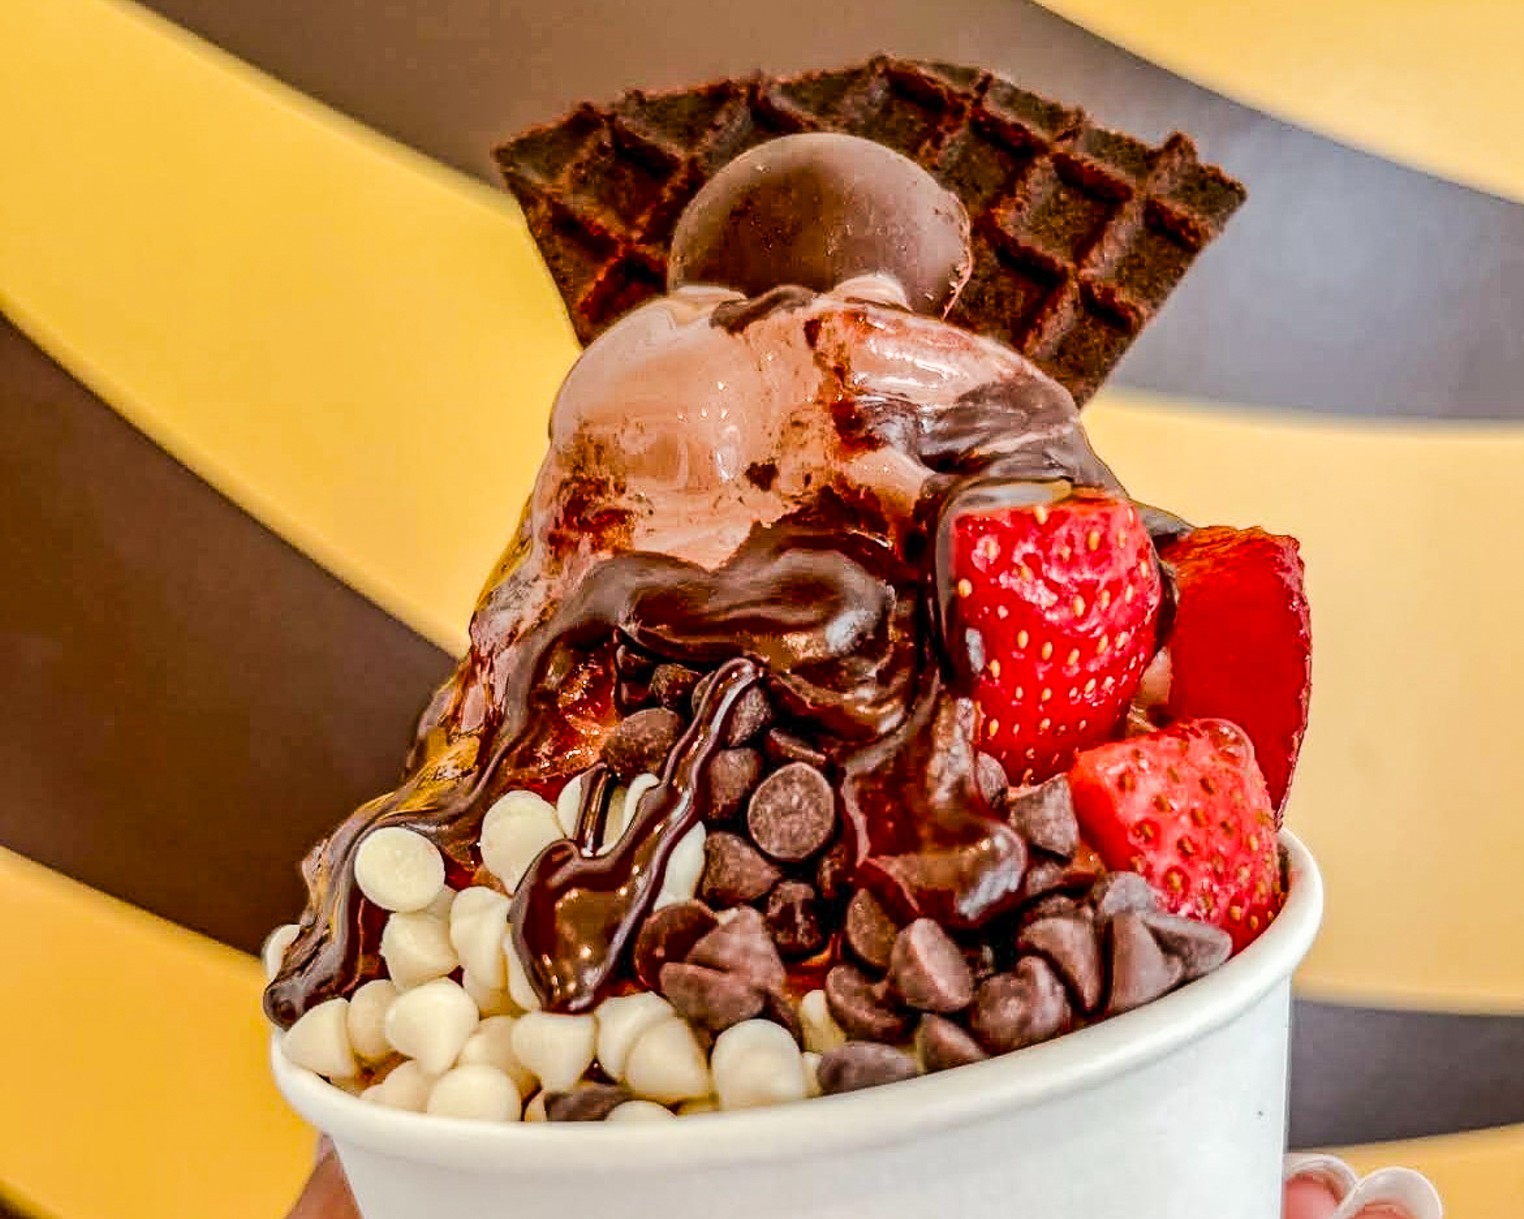 The 10 Best Ice Cream Shops in Greater Phoenix